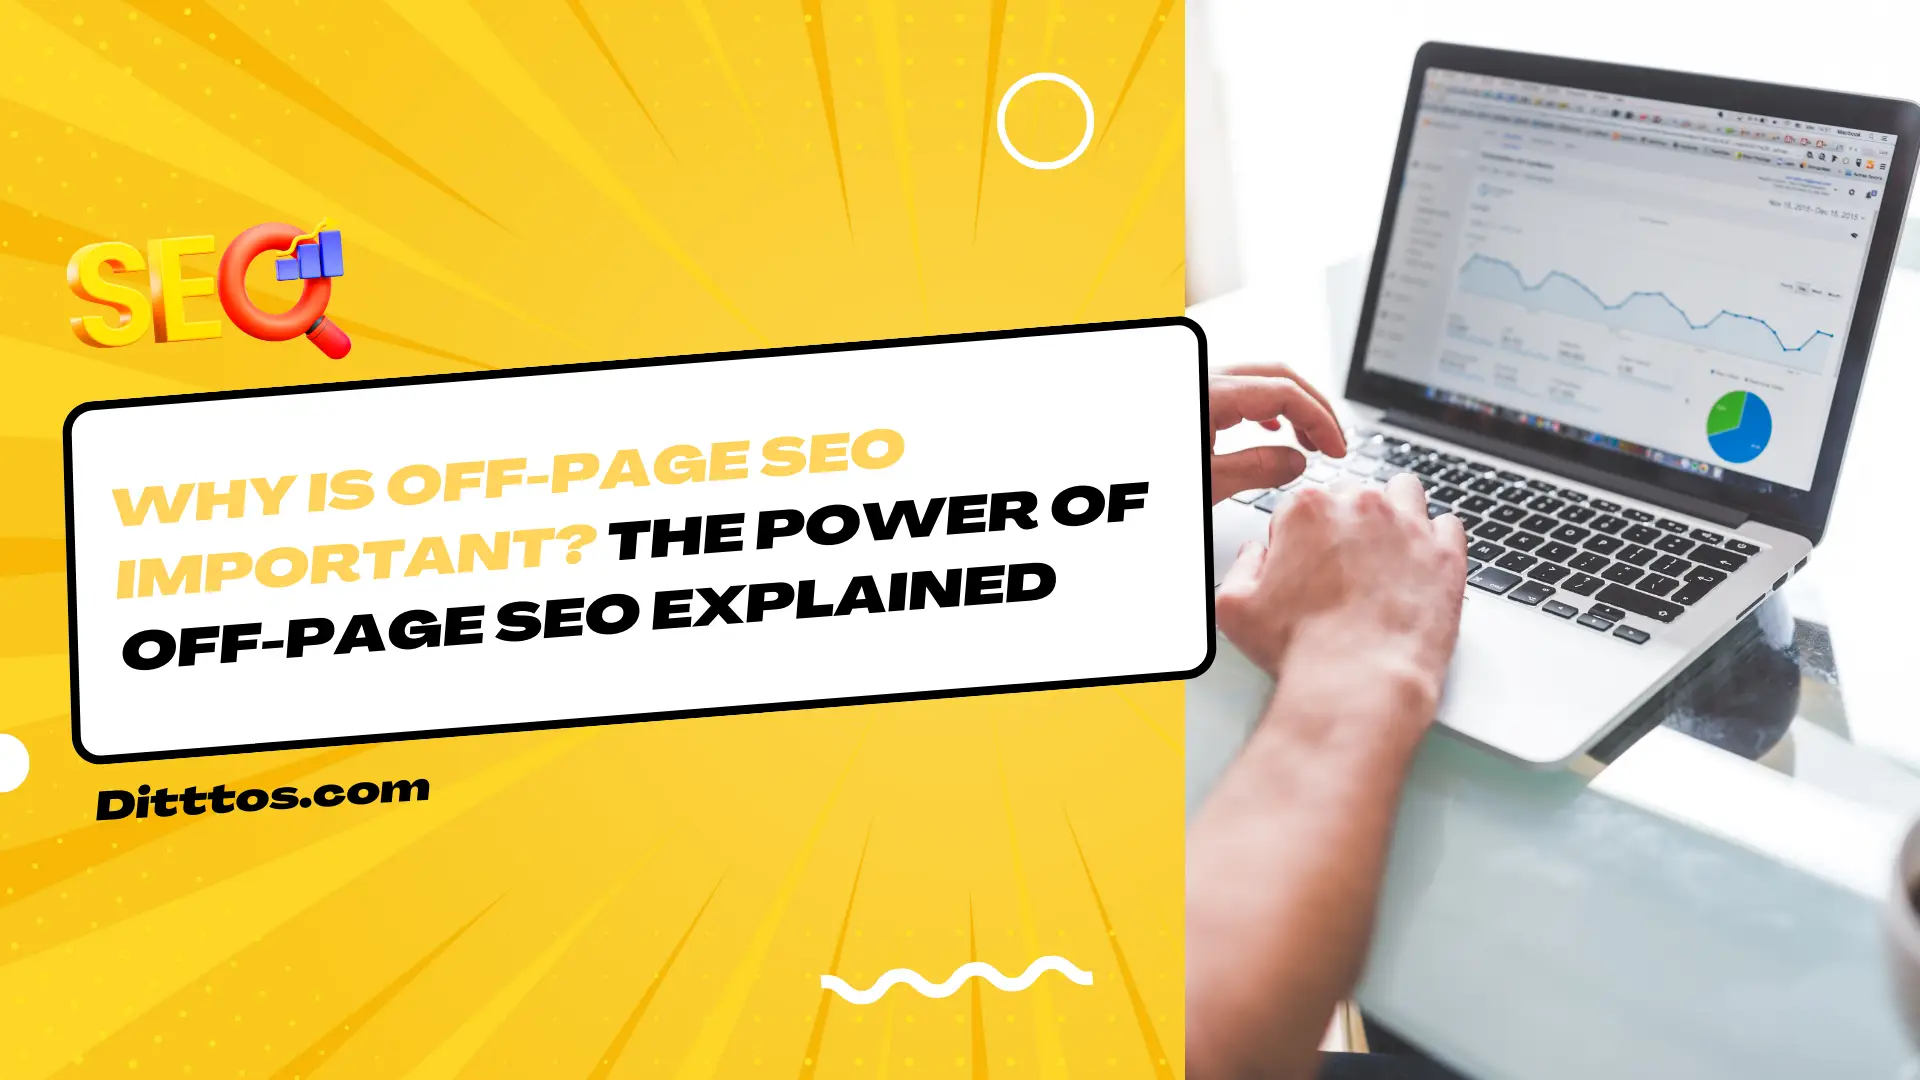 Why is Off-Page SEO Important? The Power of Off-Page SEO Explained